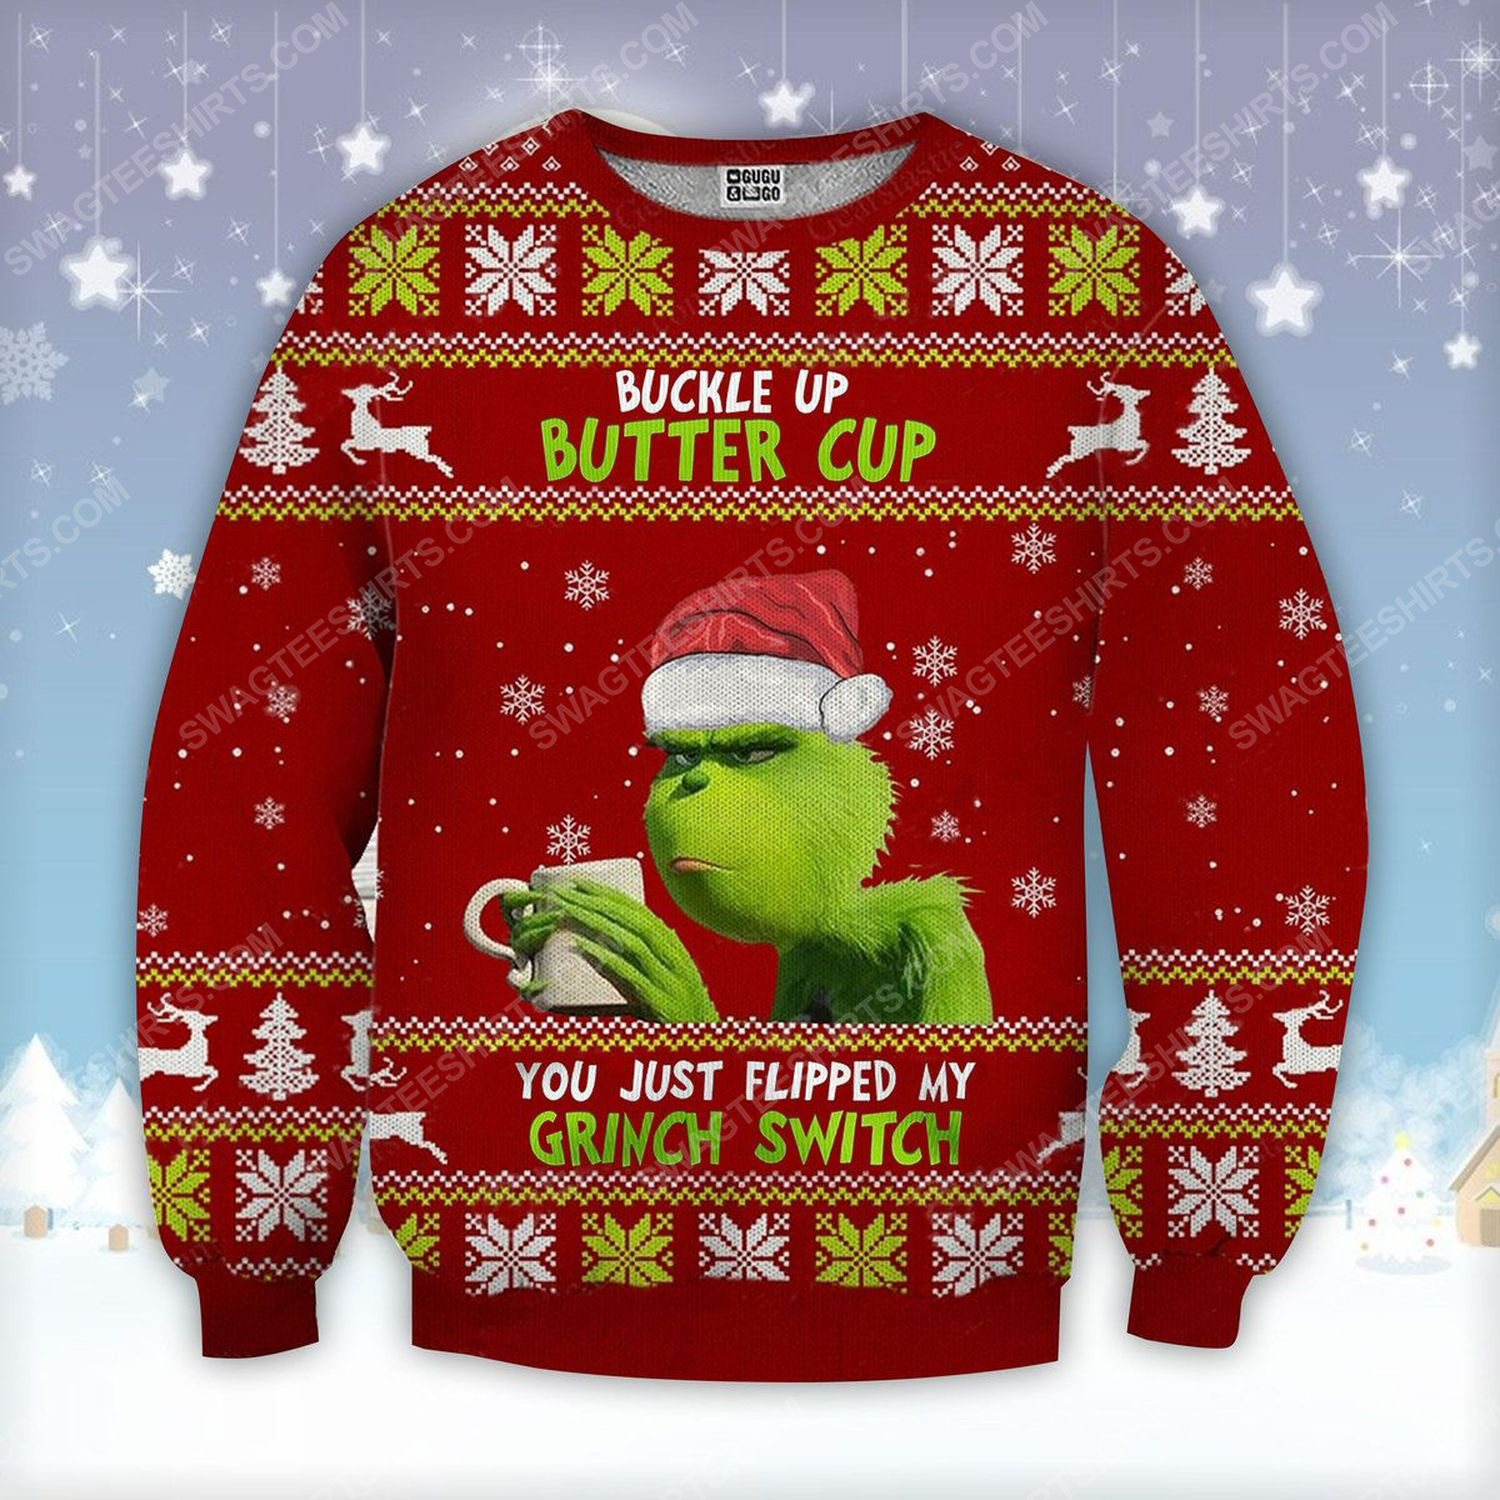 Buckle up buttercup you just flipped my grinch switch ugly christmas sweater